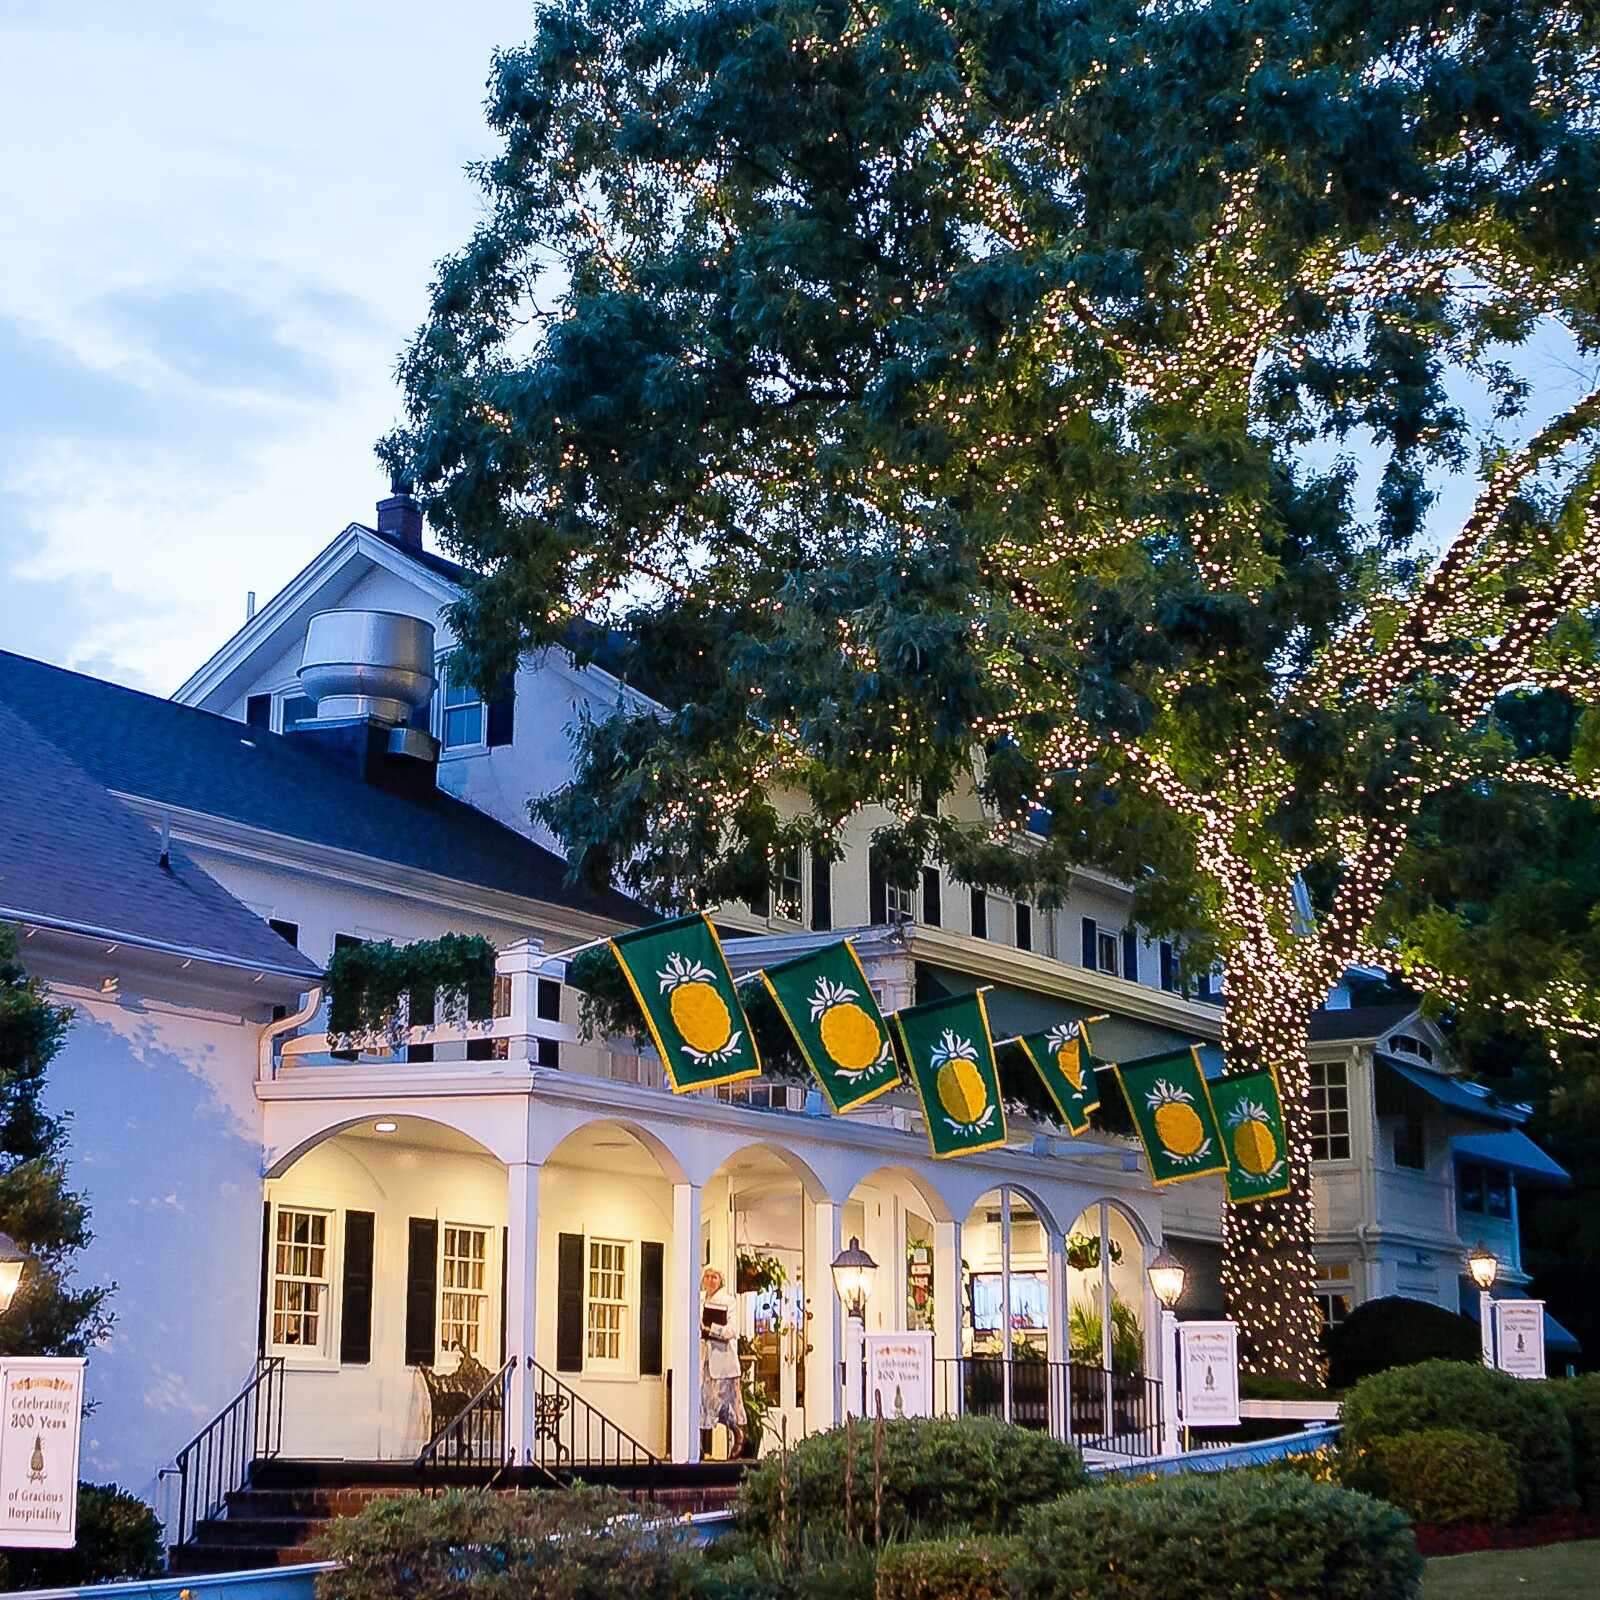 Book Your William Penn Inn Reservation Now on Resy